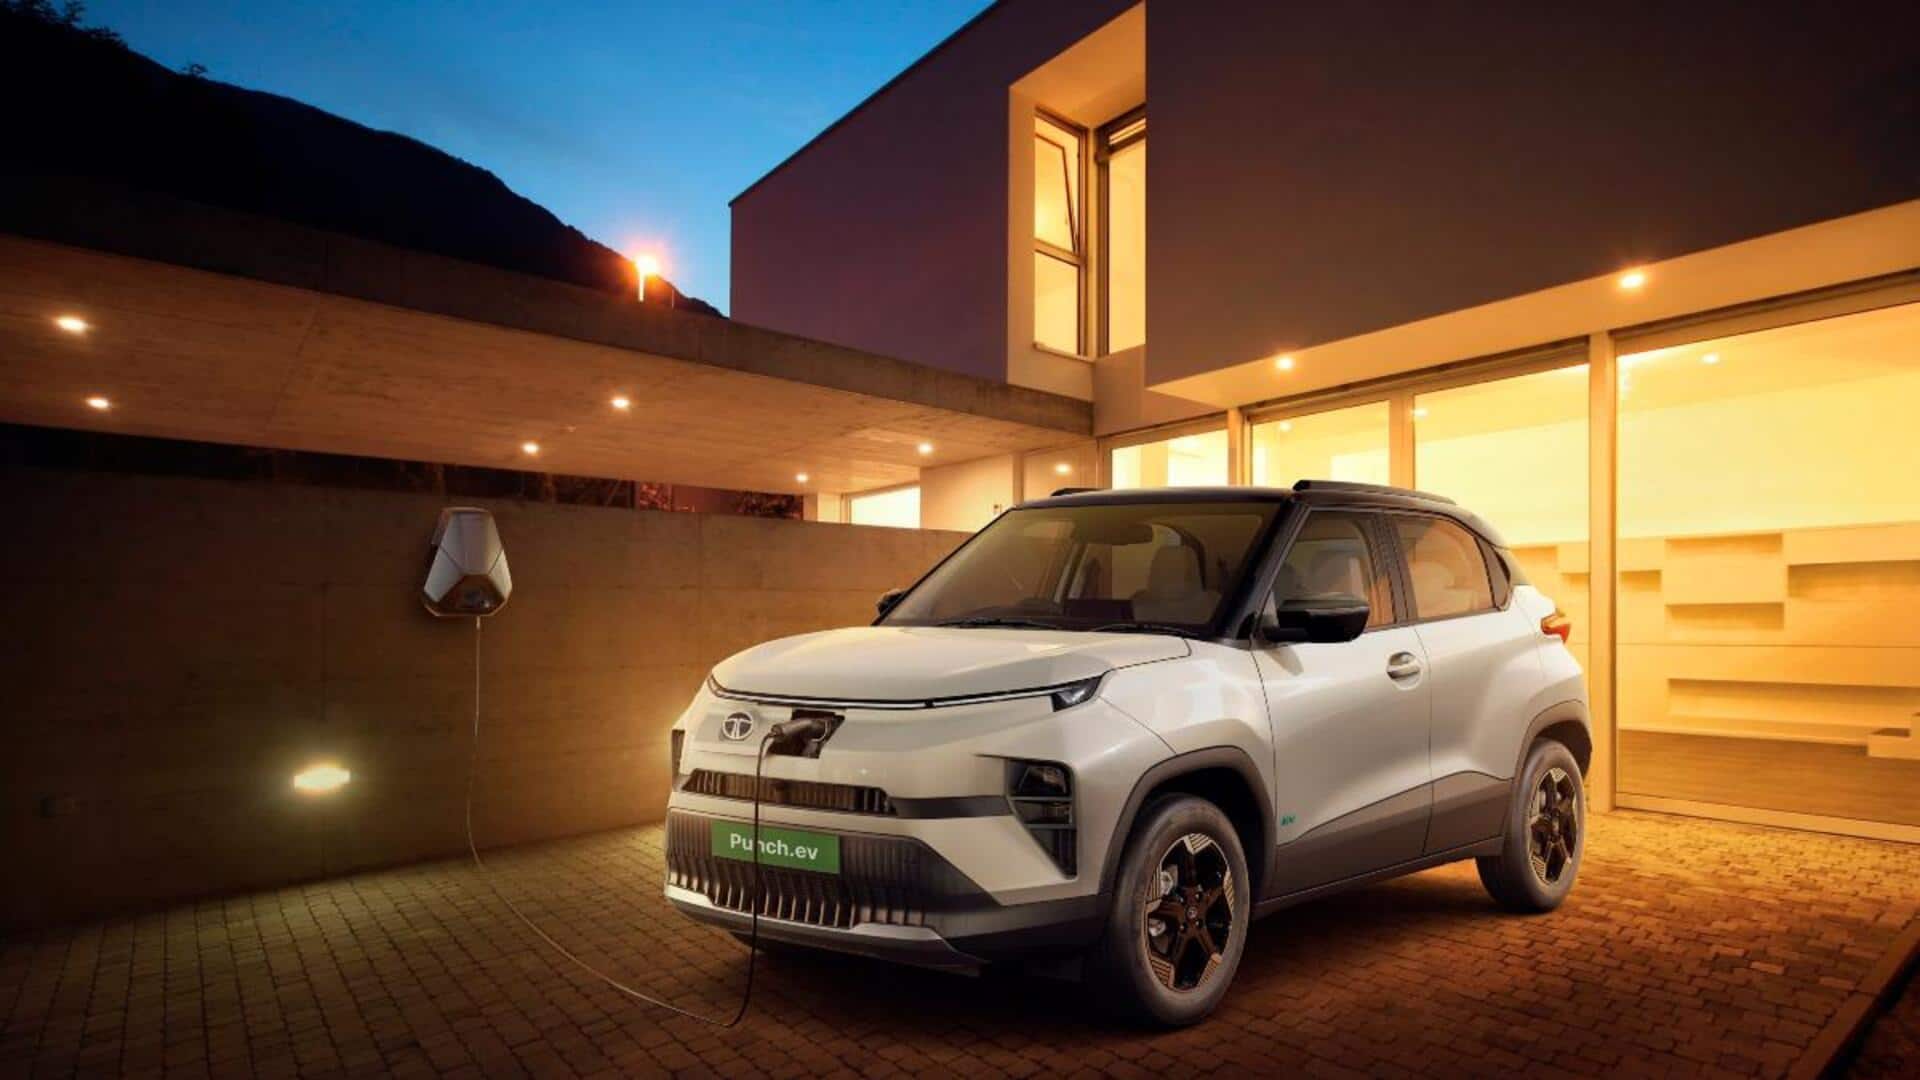 Tata Punch EV is available with discounts worth ₹50,000